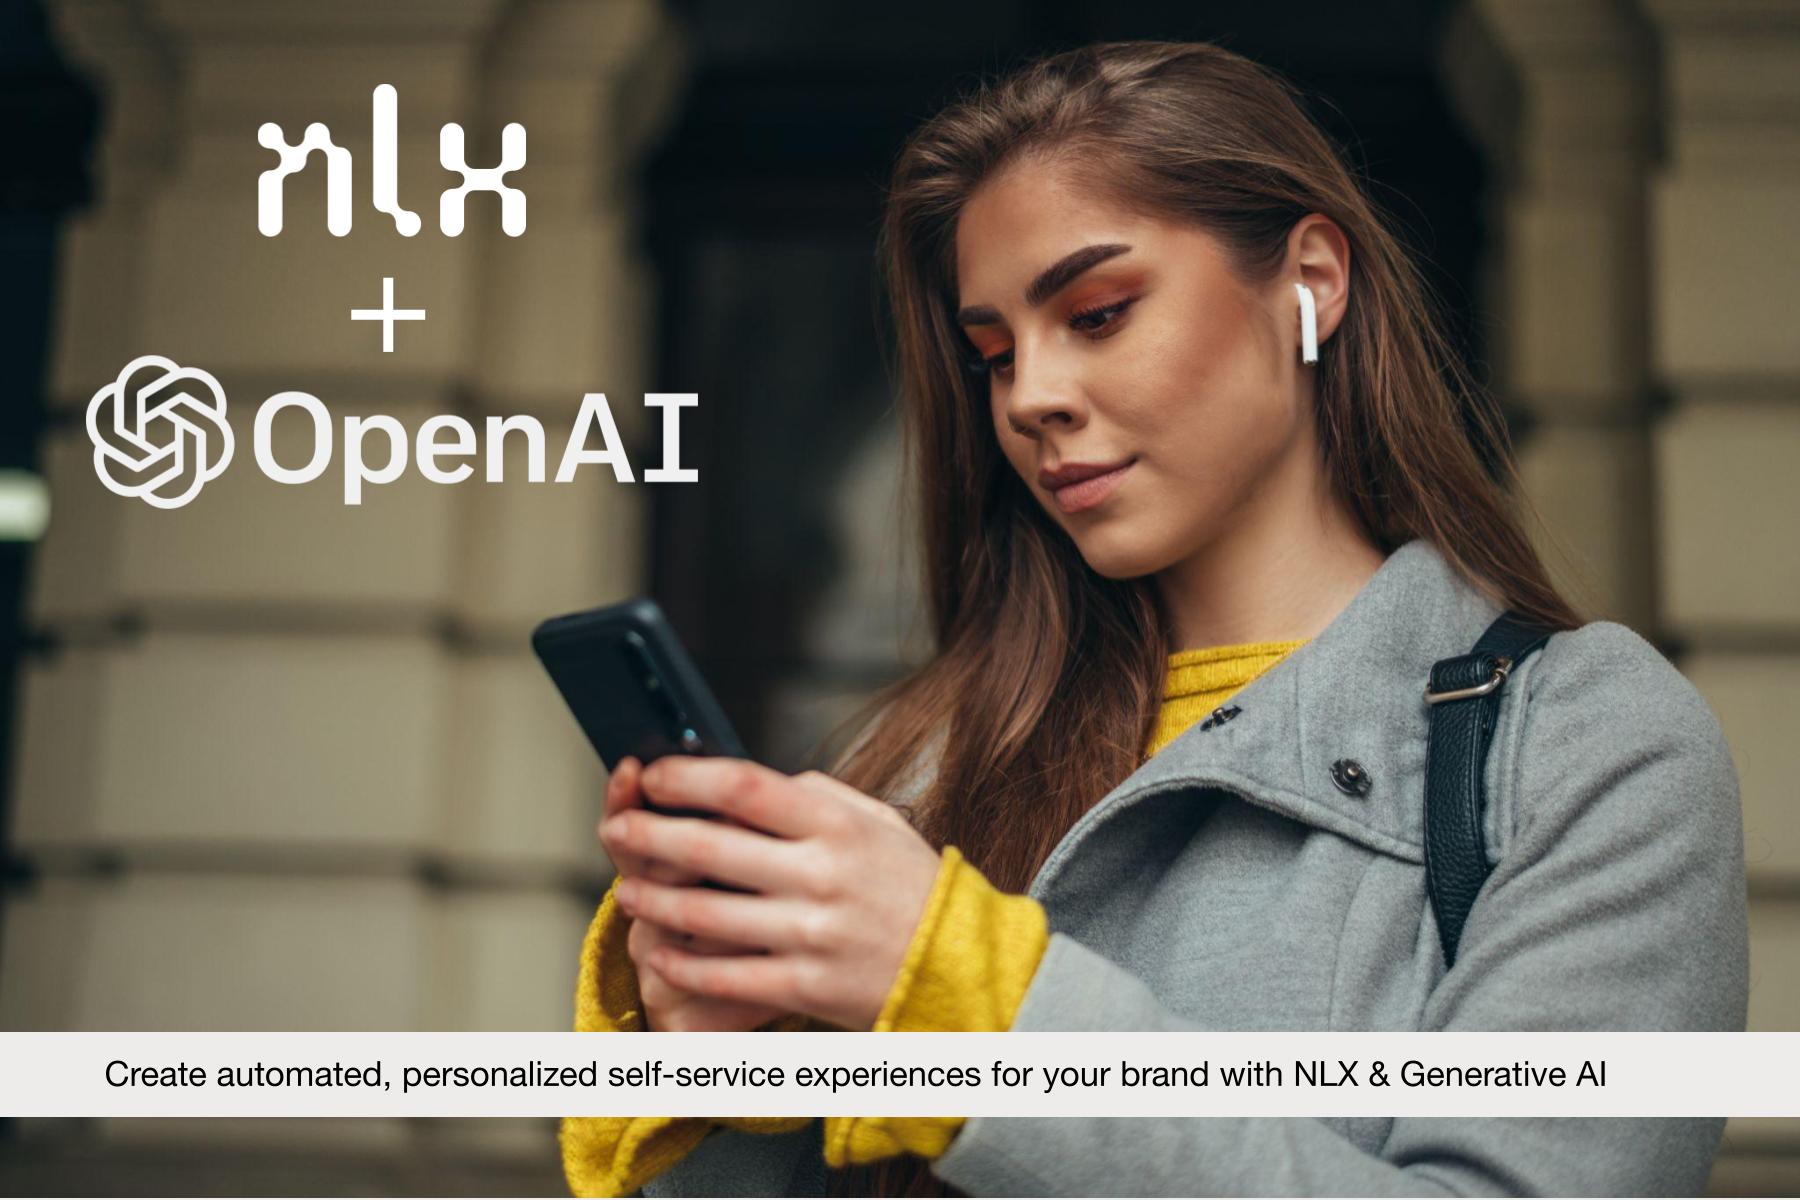 Create more contextual conversations with NLX and OpenAI! Find out how to build with the latest technologies like GPT-3 on our website.